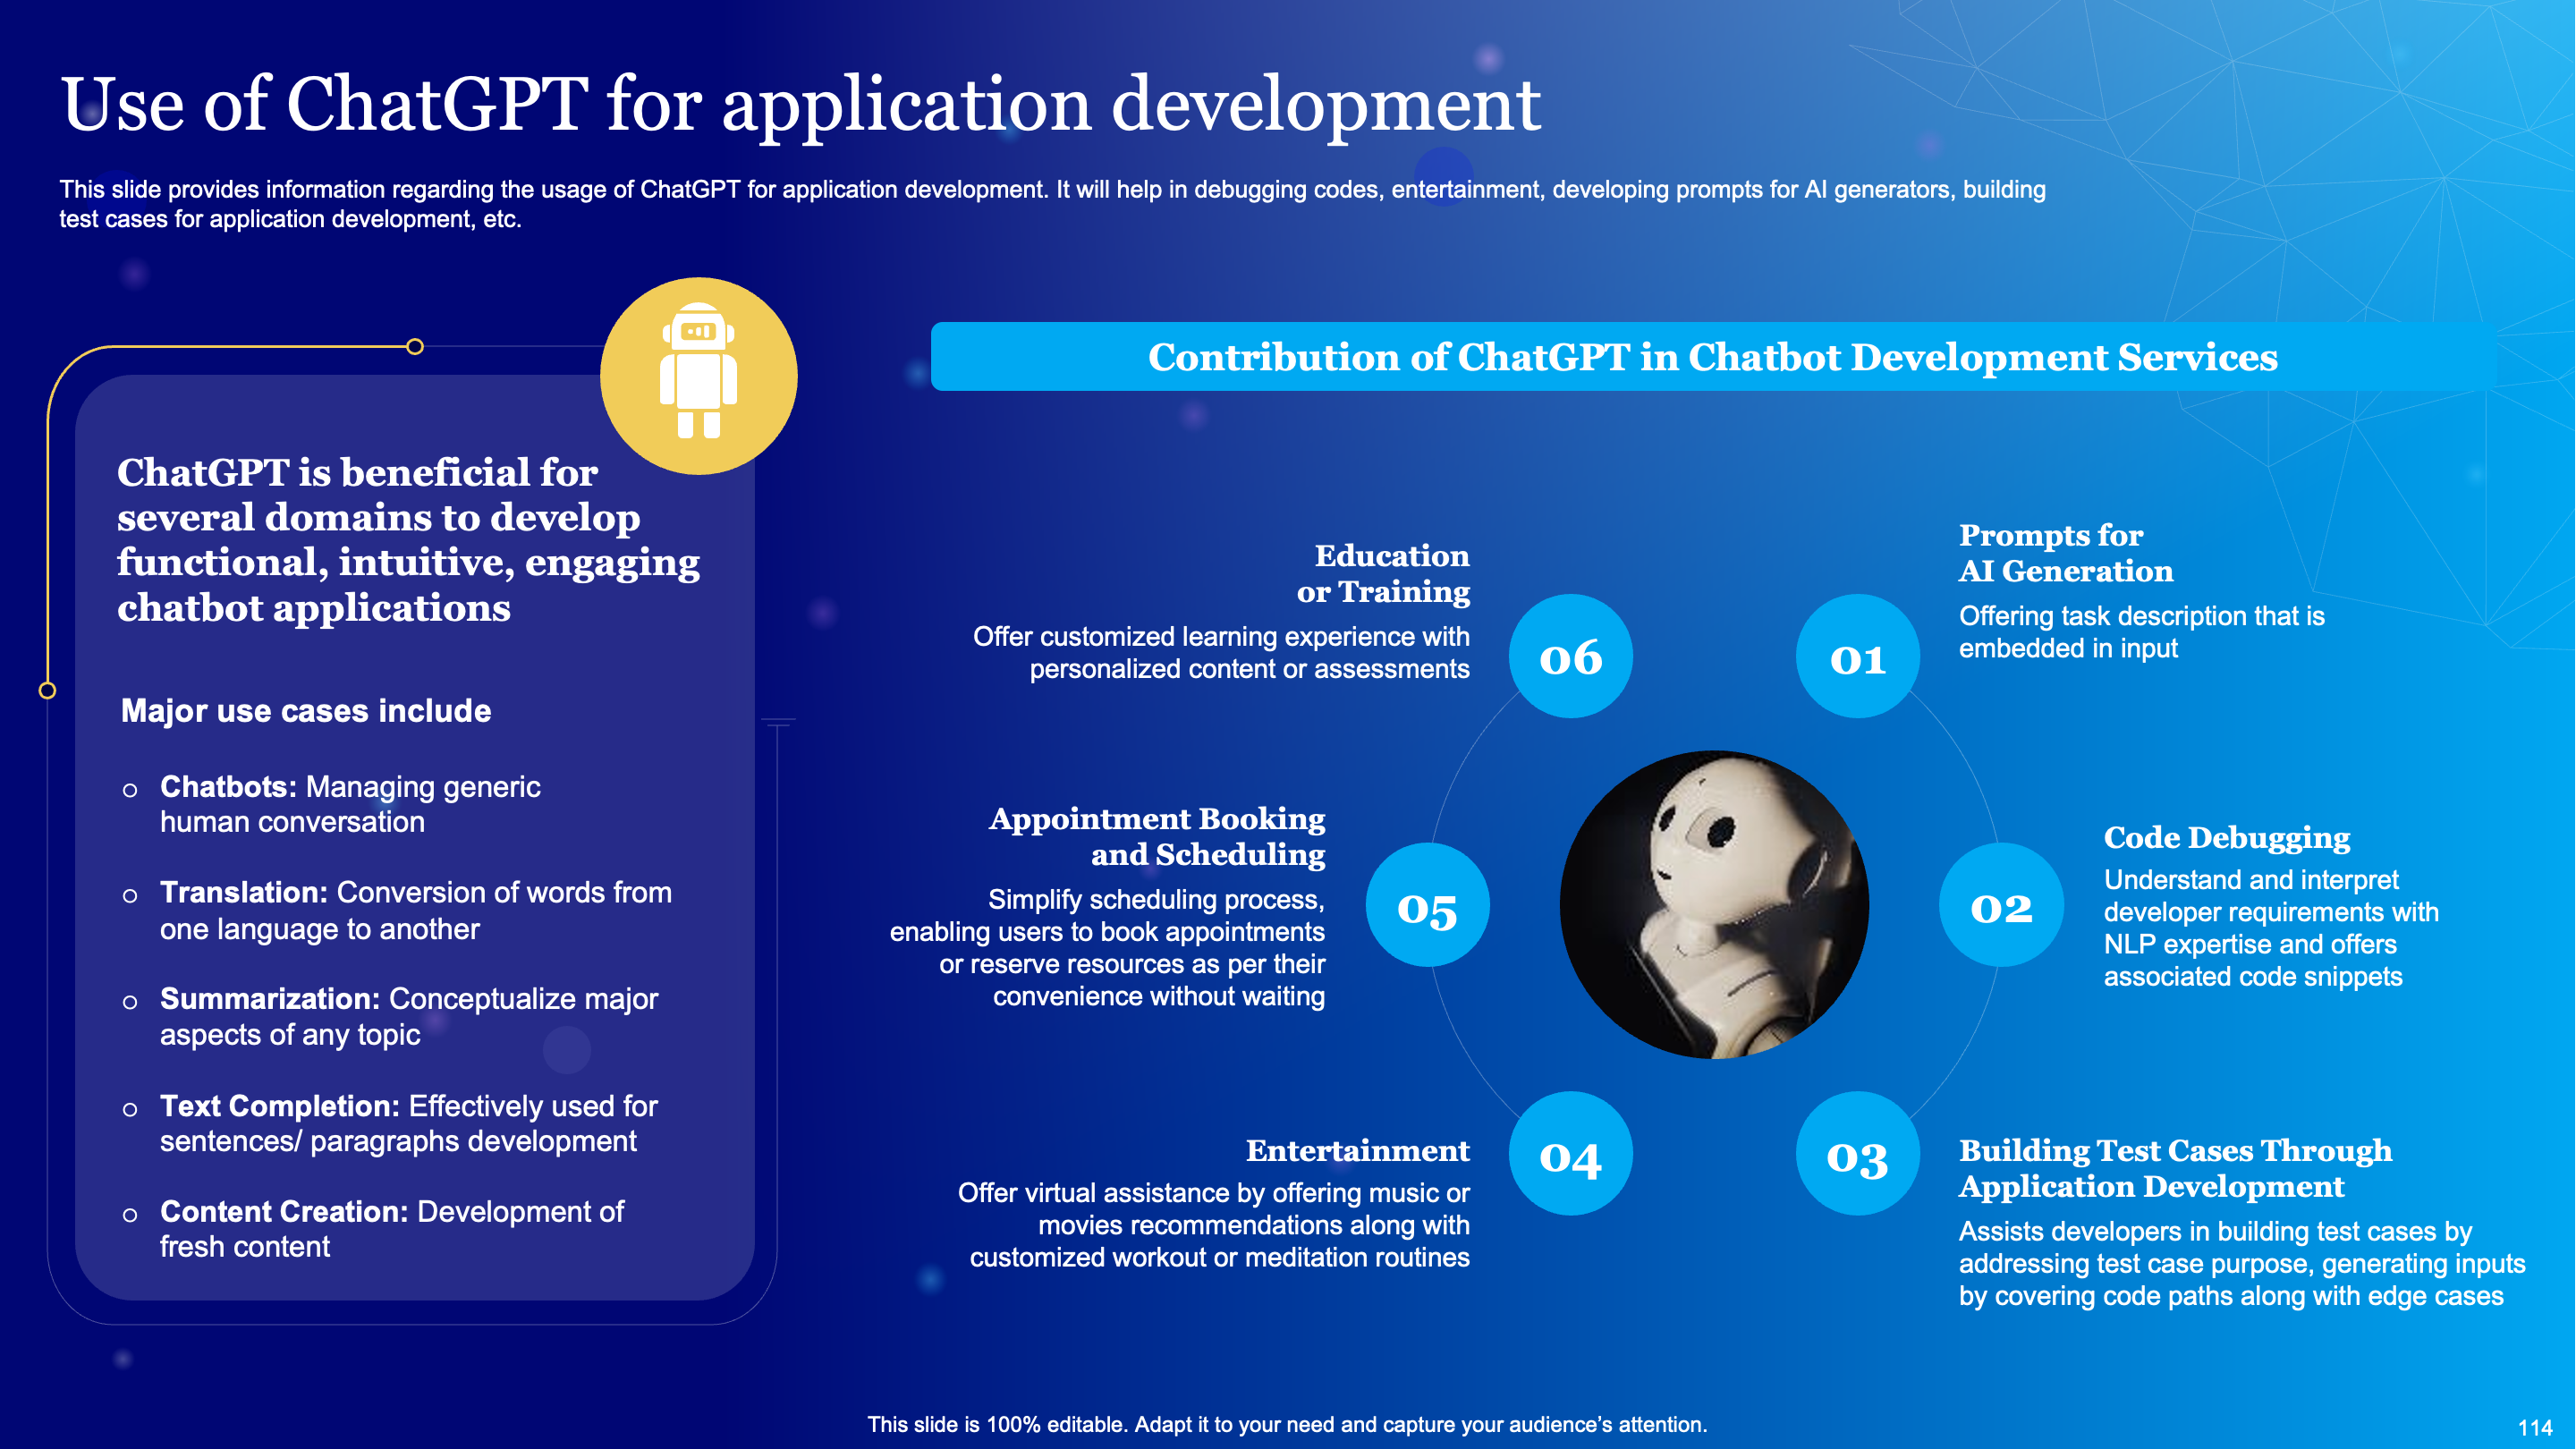 Use of ChatGPT for Application Development